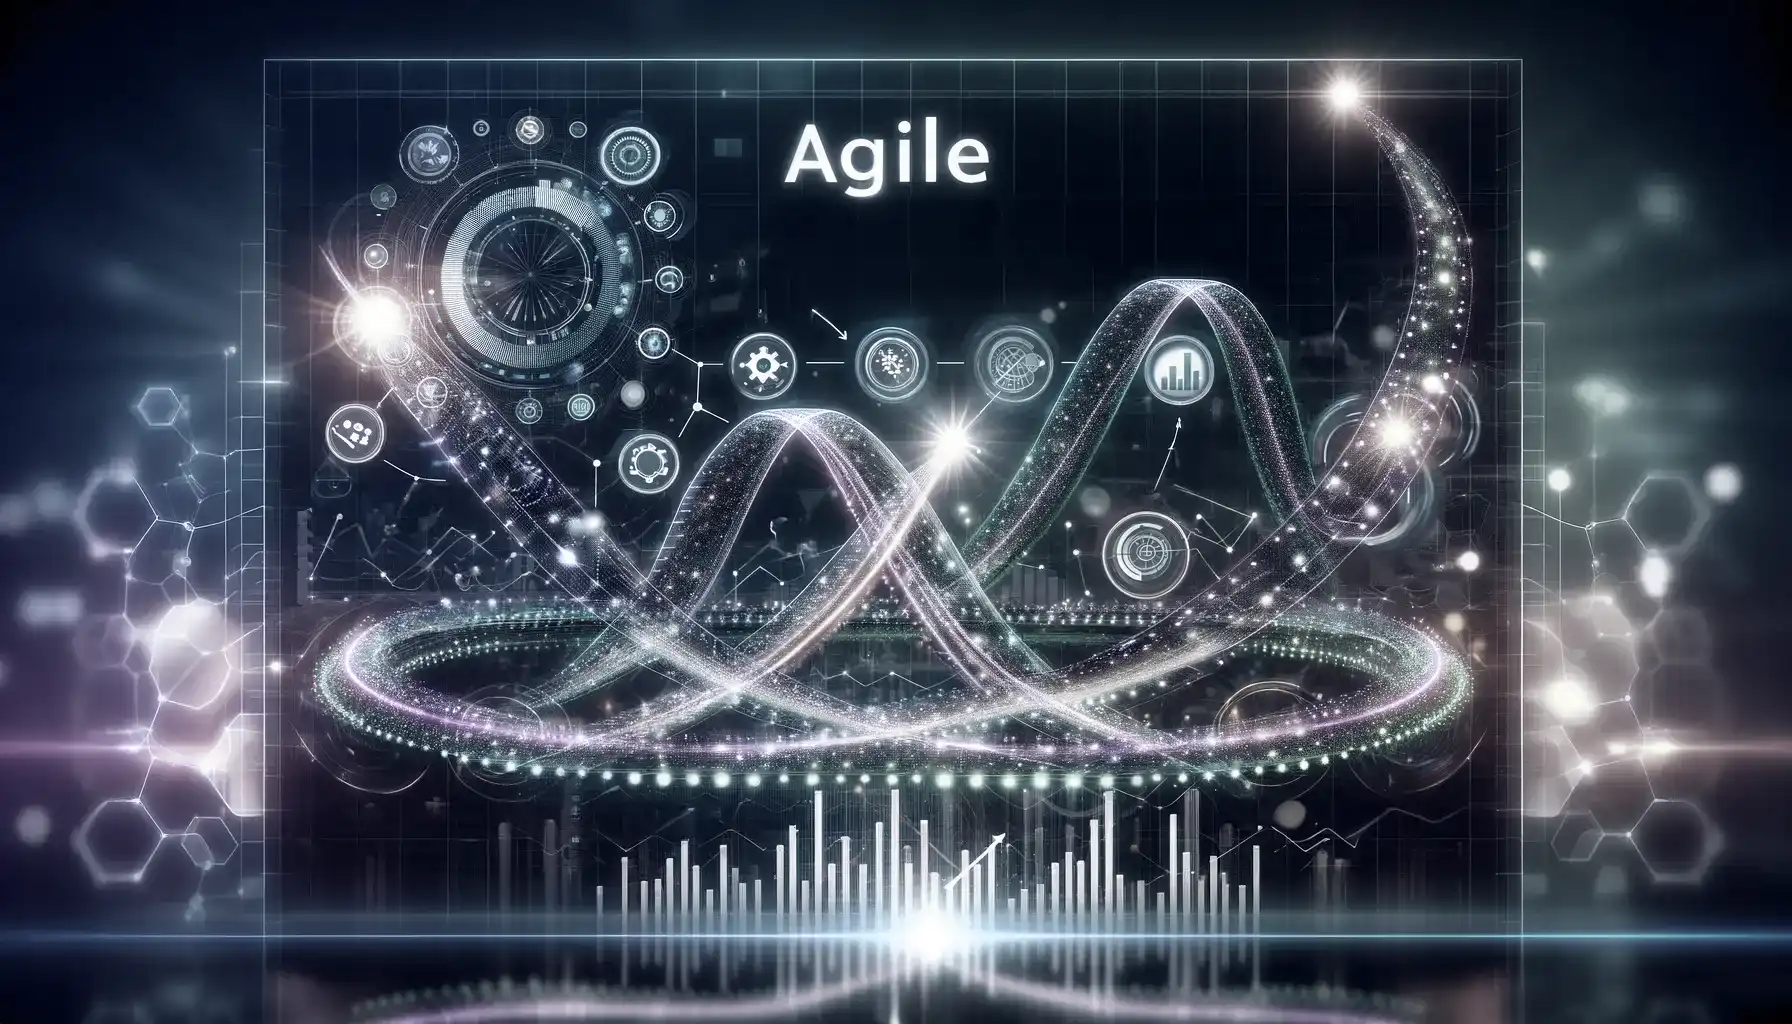 This 16x9 image visualizes the concept of agile transformation in business. It features dynamic and easily understandable agile imagery like iterative loops, flexible graphs, and adaptive flowcharts, all highlighted in green and purple neon lights. These elements suggest continuous improvement and adaptability, key traits of the agile method. Data streams depicted in neon colors move within these agile structures, representing the flow of investment and resources driving innovation and efficiency.